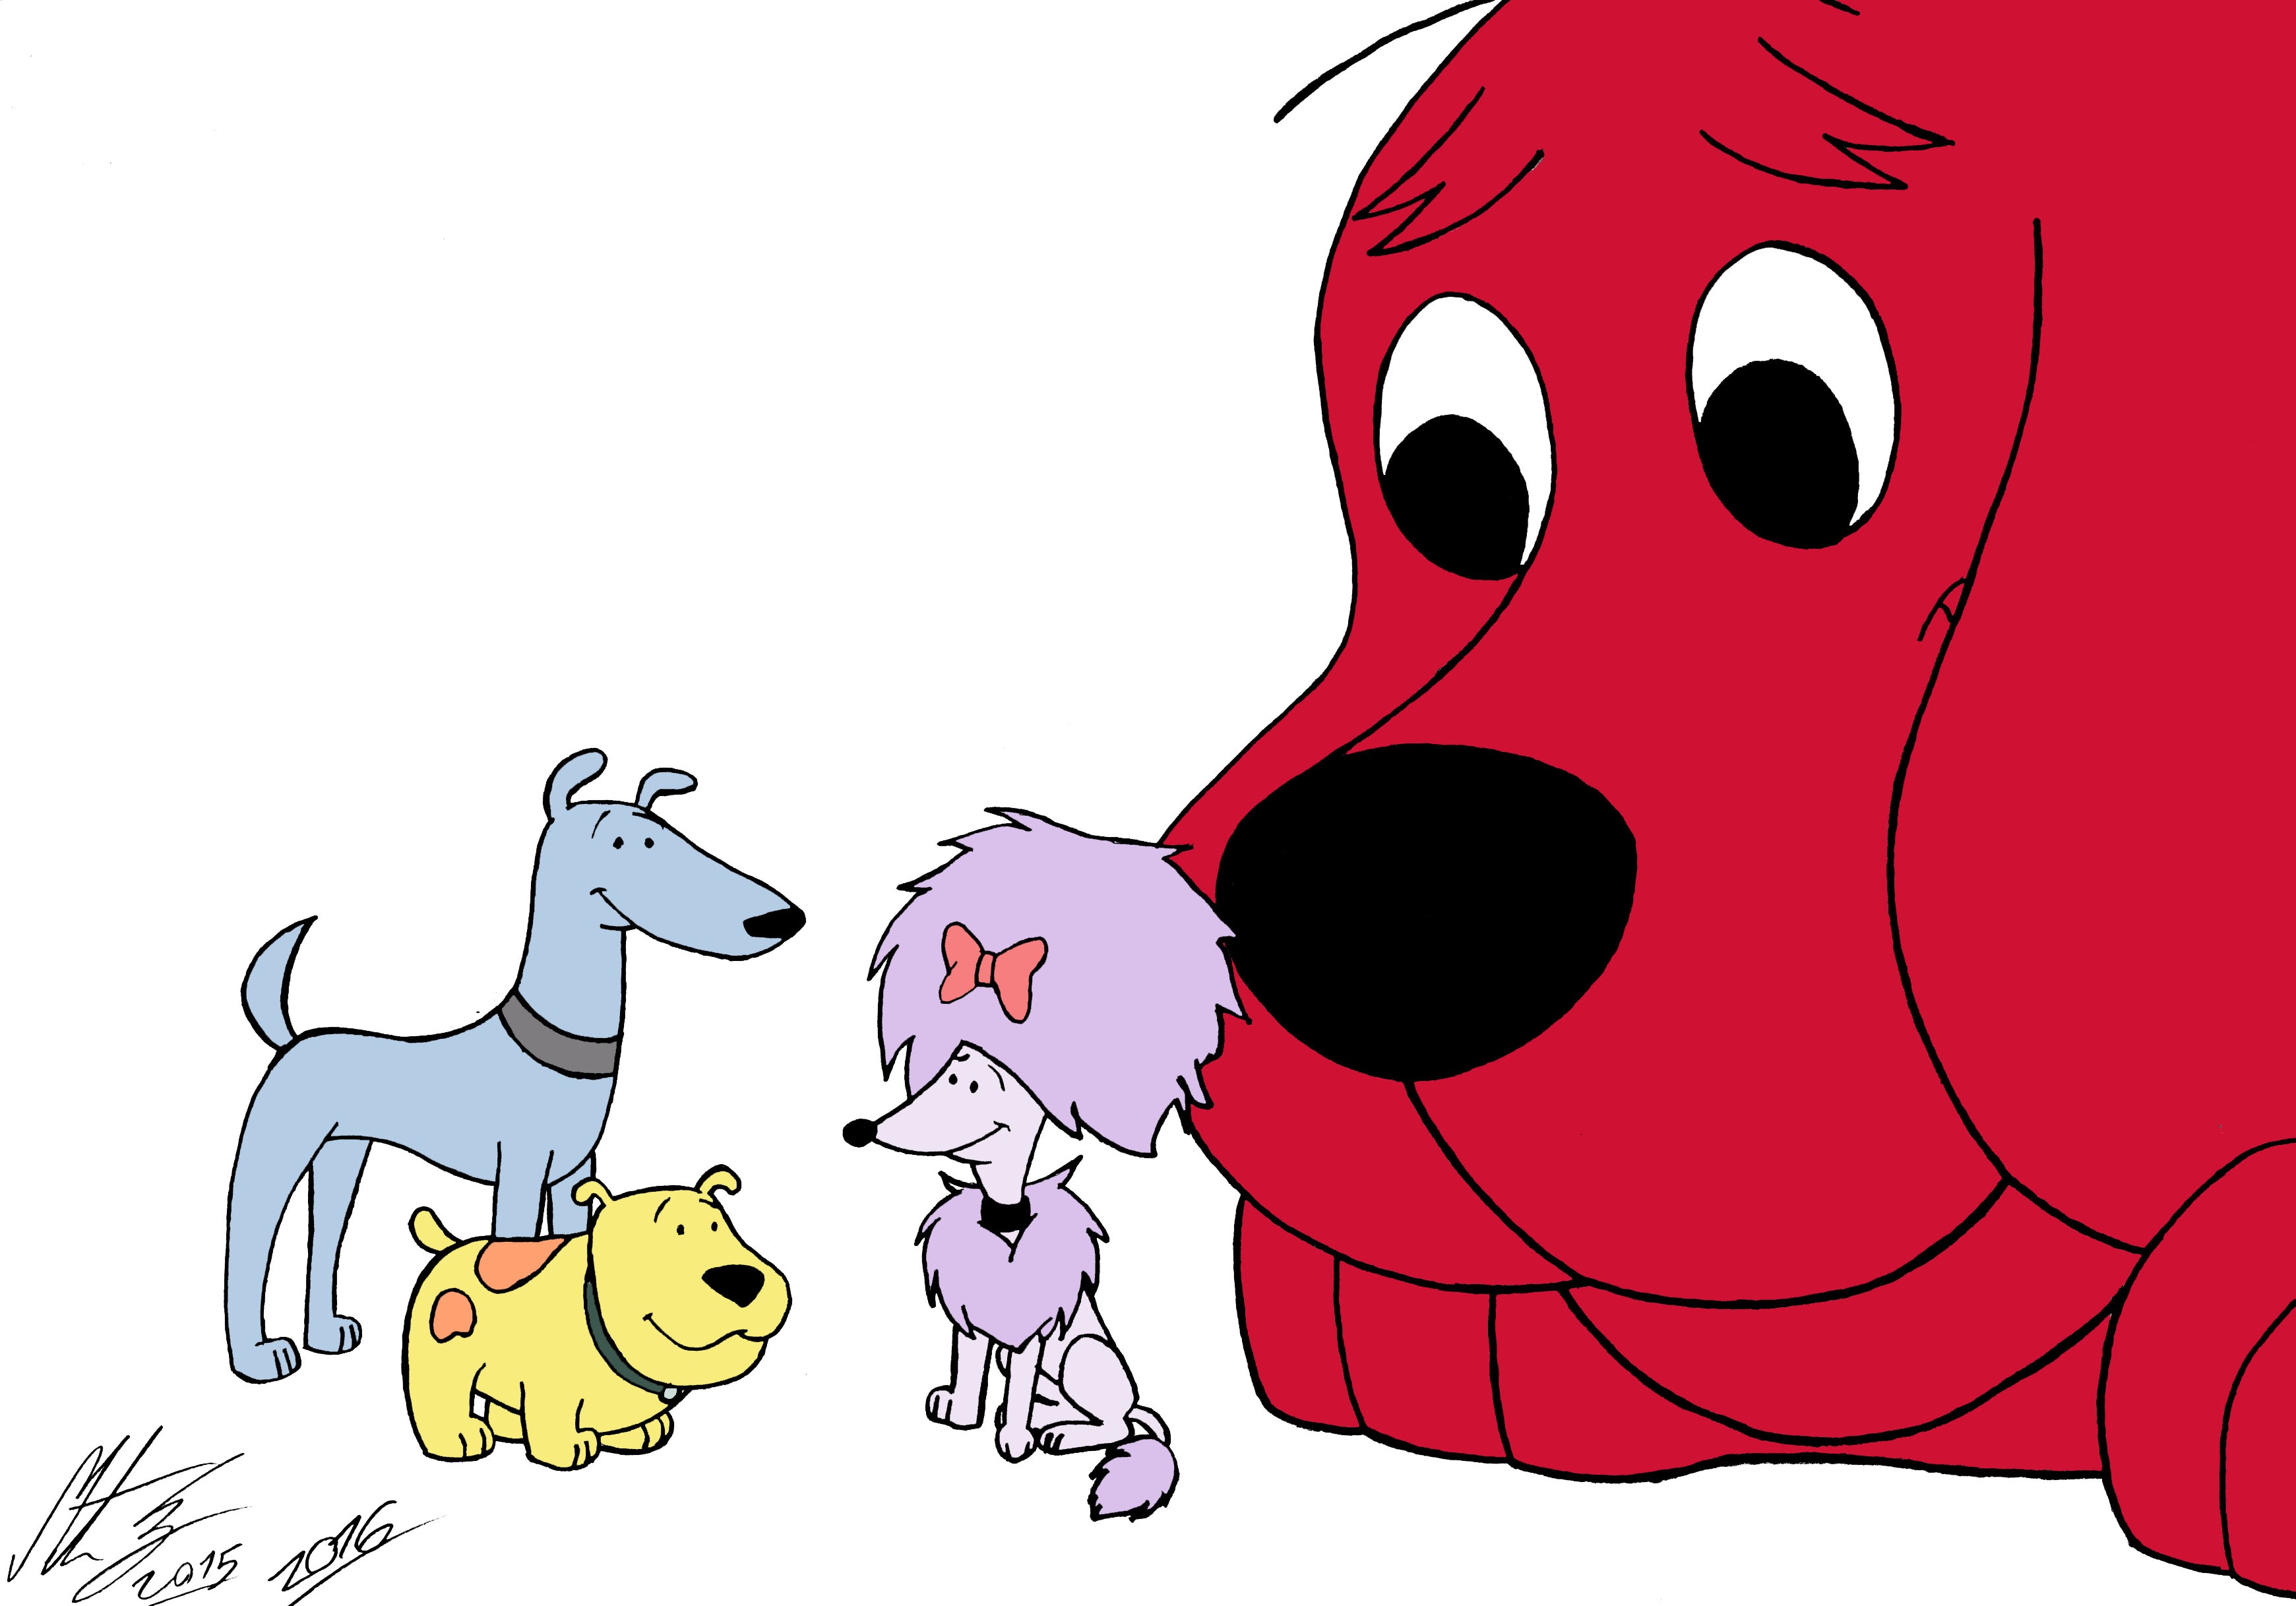 Clifford the Big Red Dog - The Best Friends by MortenEng21 on DeviantArt